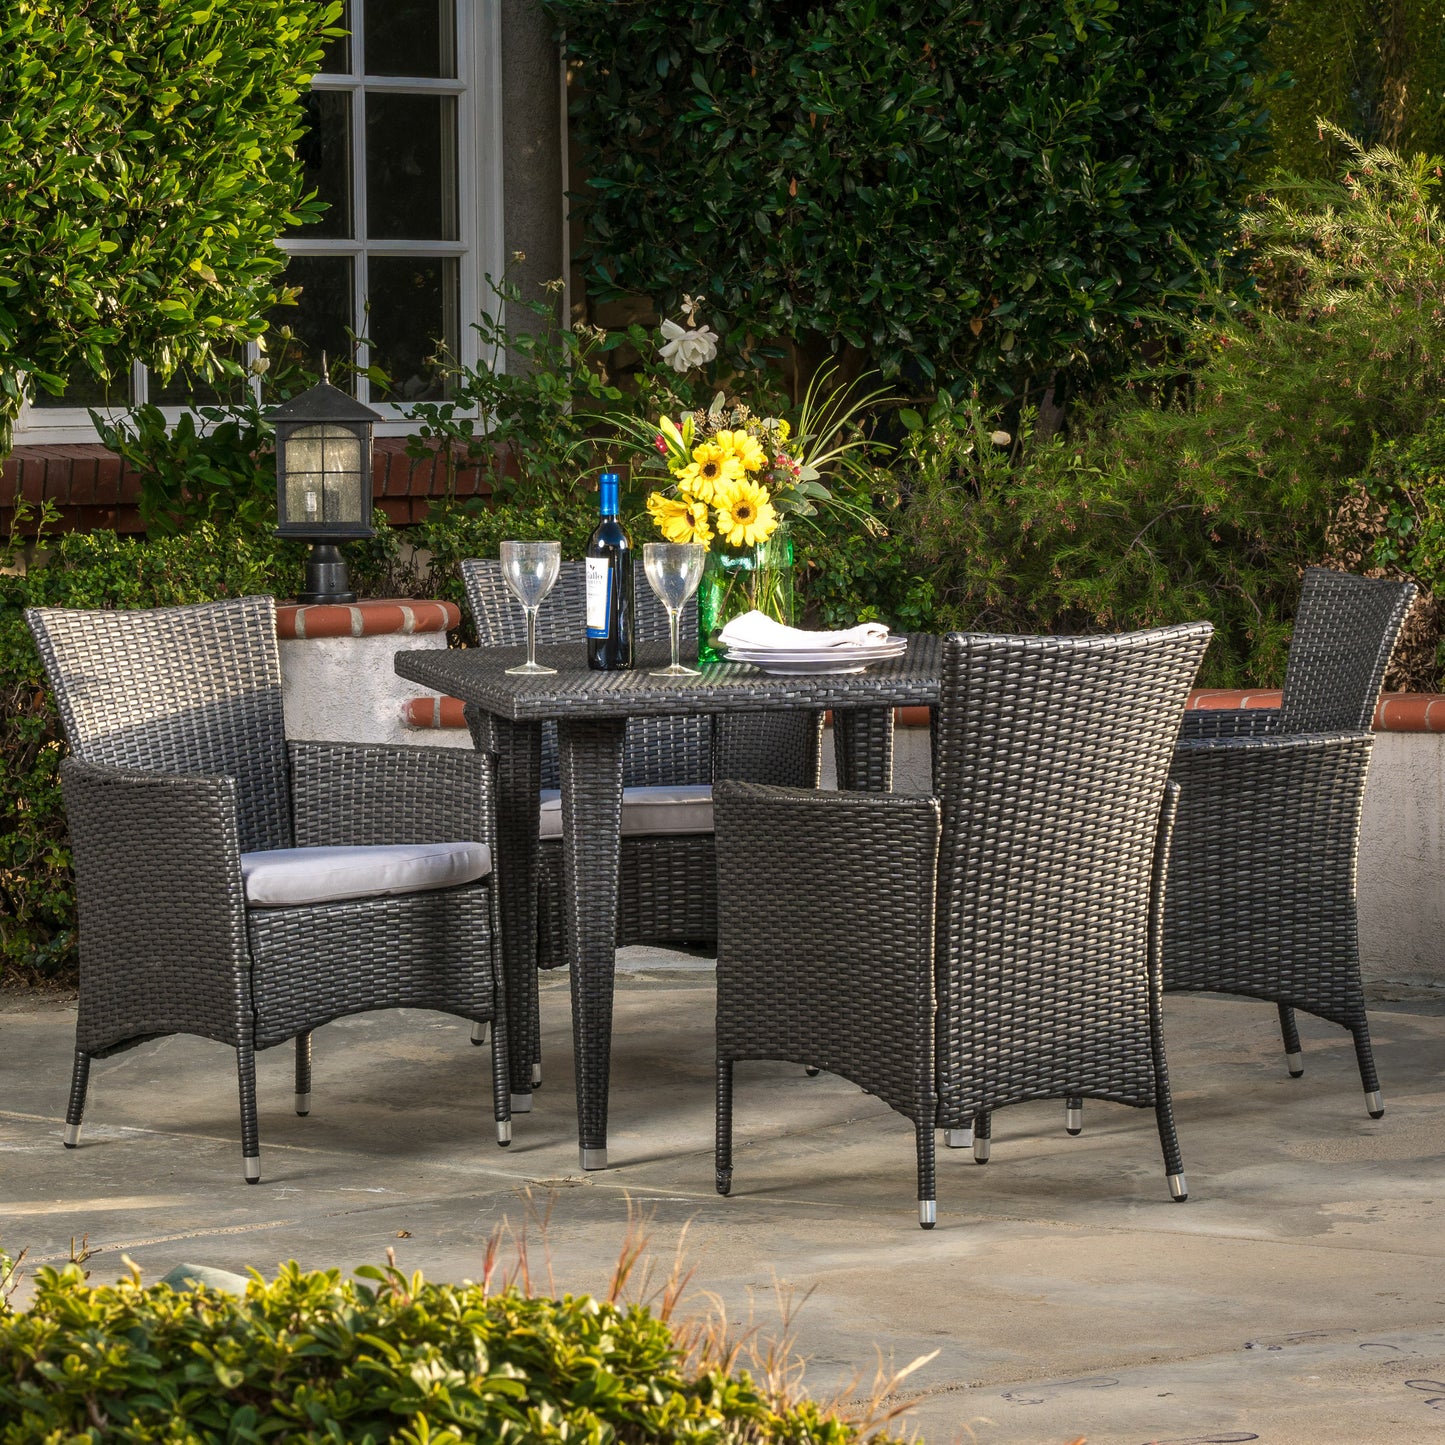 Brynhild Outdoor 5-Piece Gray Wicker Dining Set with Gray Cushions